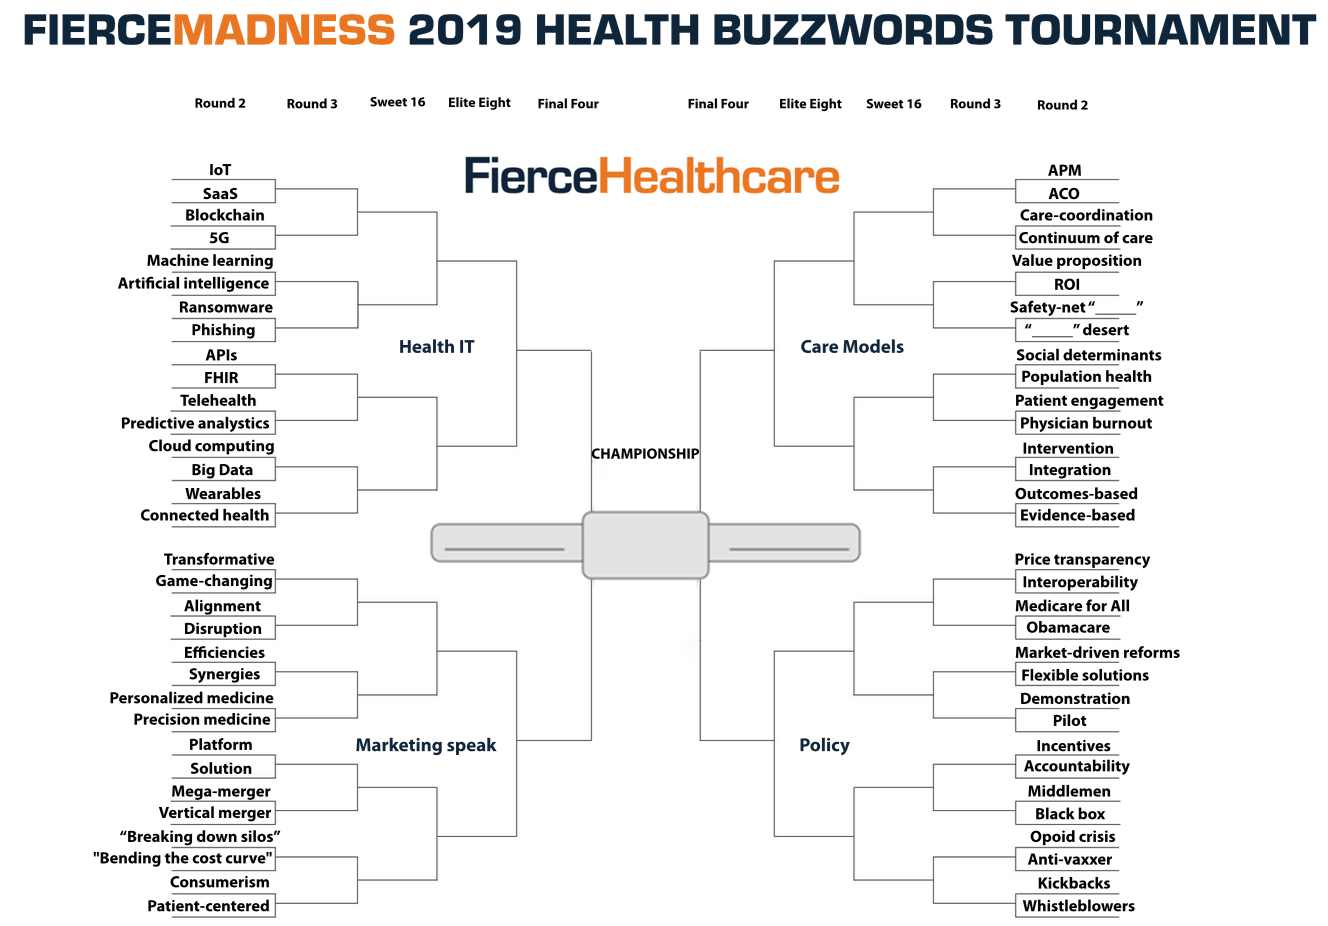 #FierceMadness, Health Buzzwords: Grab a bracket and vote for the most overused buzzword of 2019!